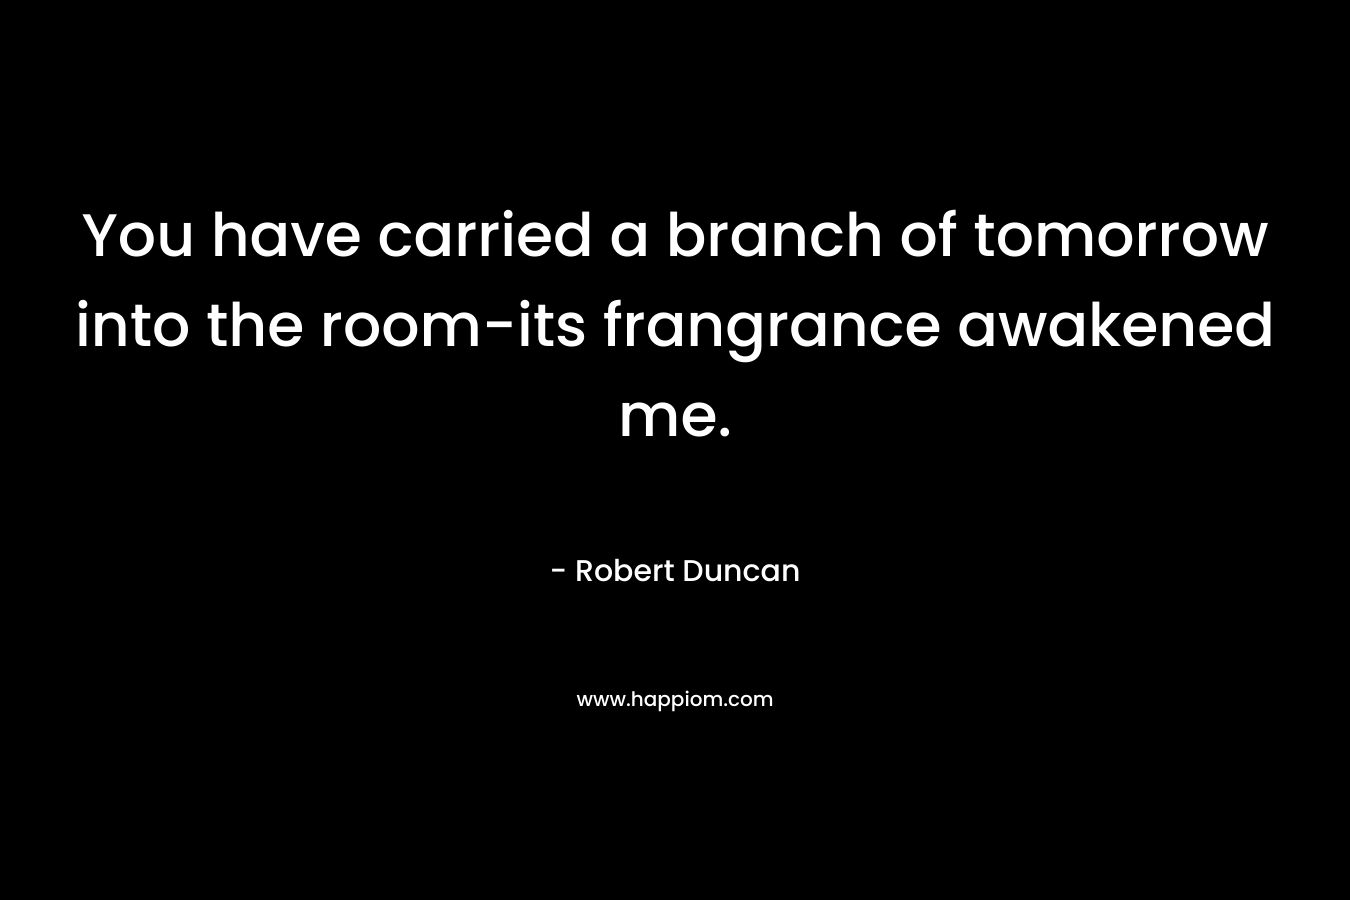 You have carried a branch of tomorrow into the room-its frangrance awakened me.